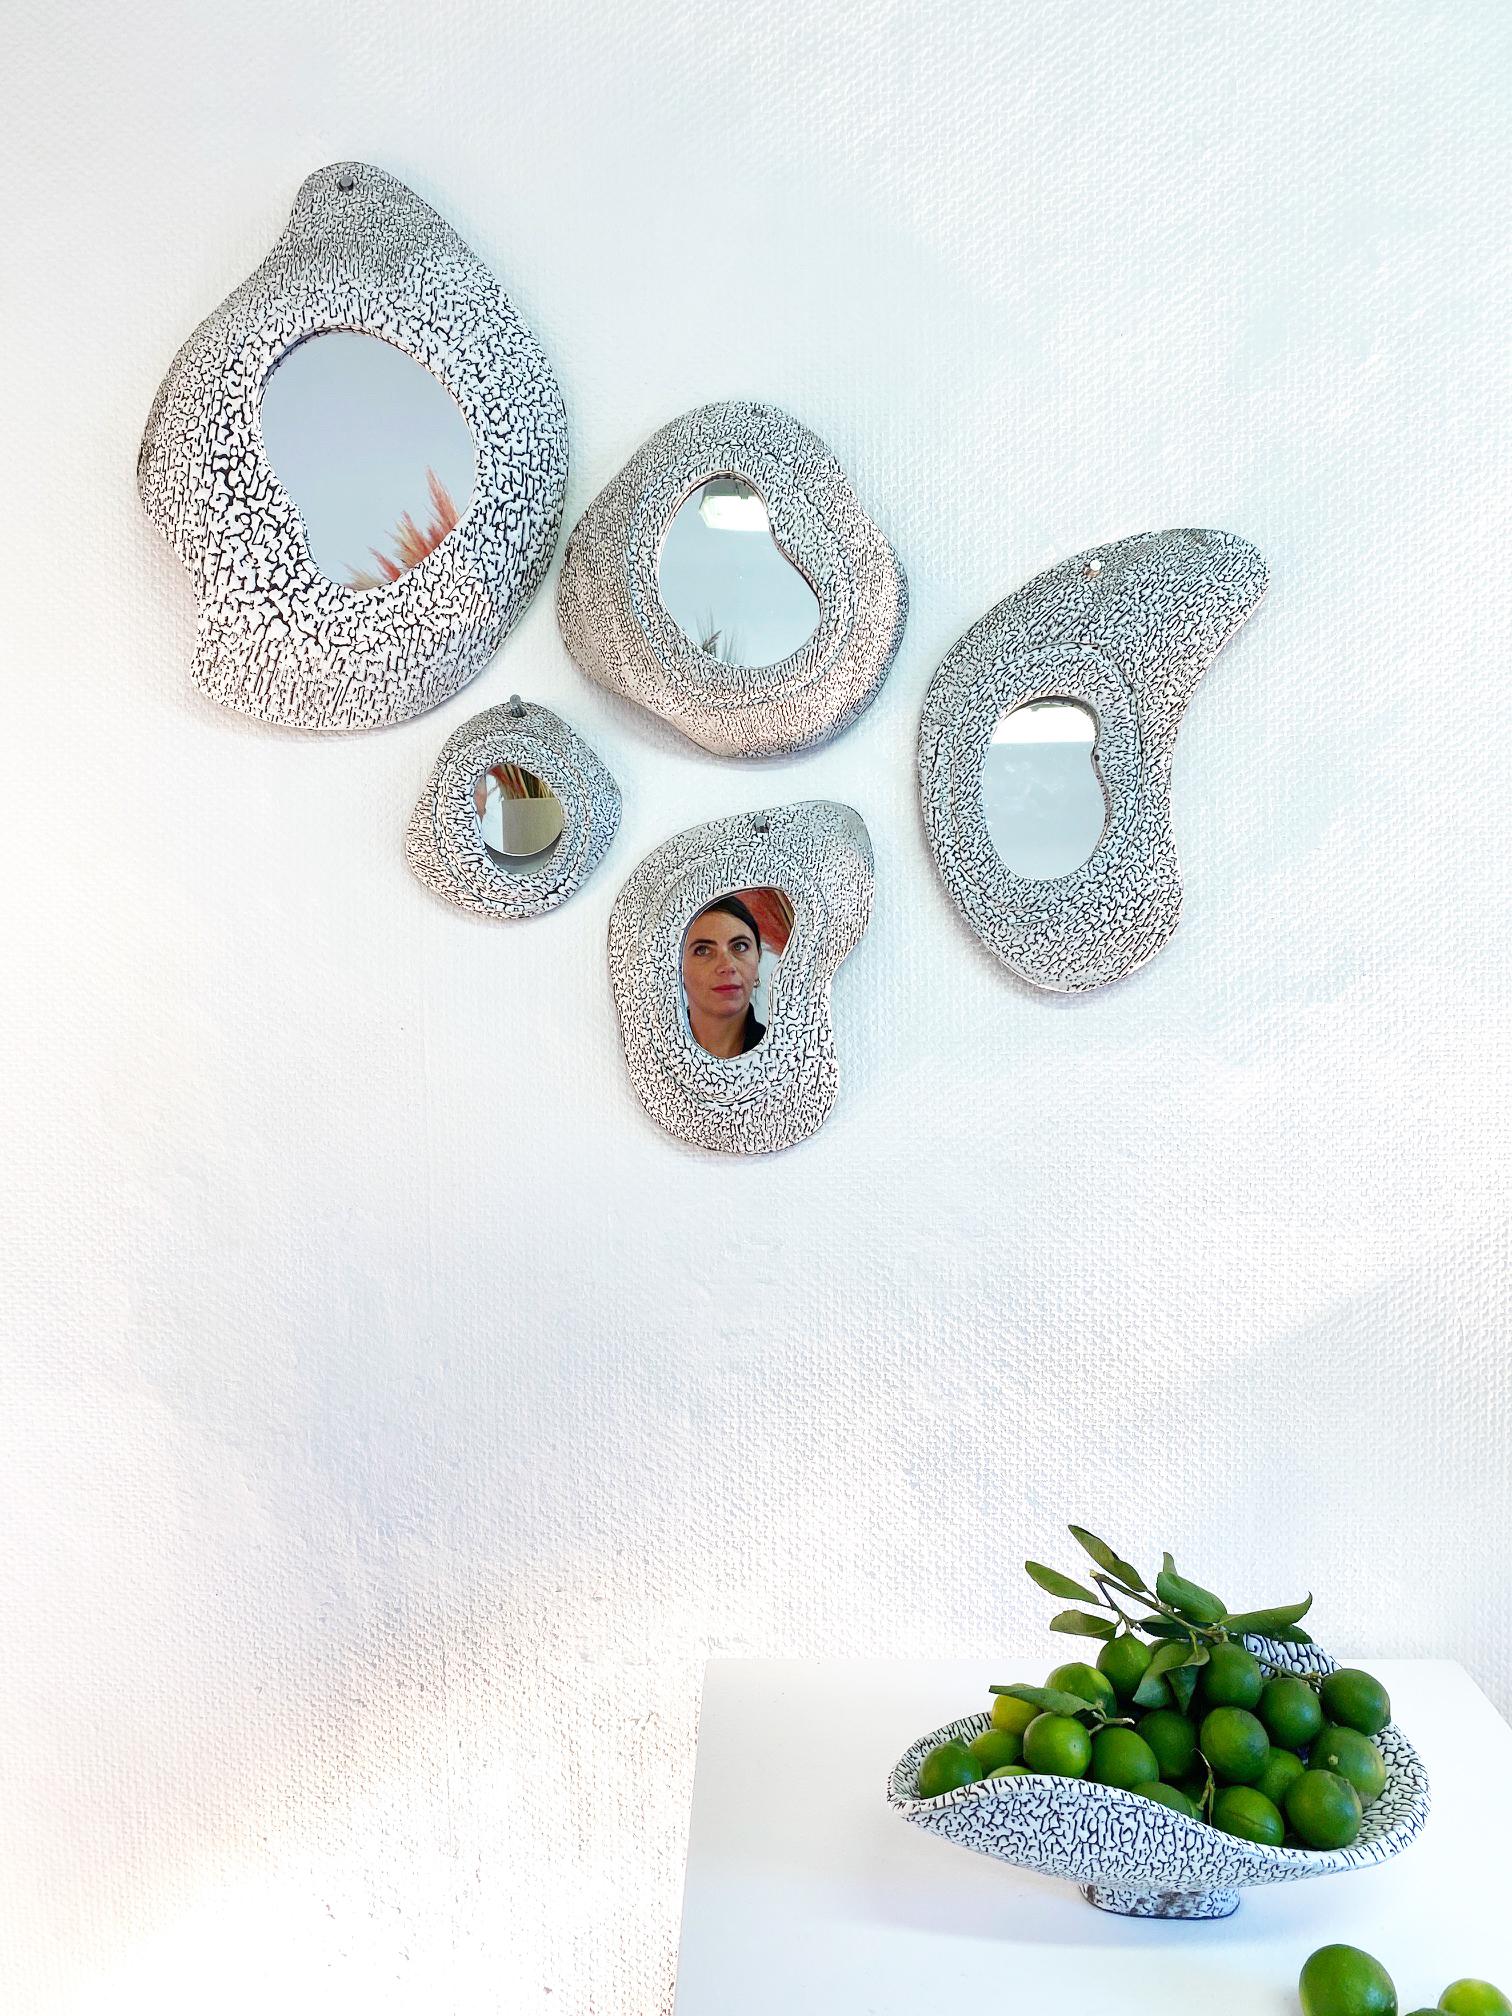 Set of 5 ceramic mirrors by Olivia Cognet
Materials: Ceramic 
Dimensions: Medium around 35-40 cm tall
 Large around 45-55 cm tall

  

Each of Olivia’s handmade creations is a unique work of art, the snapshot of a precious moment captured in